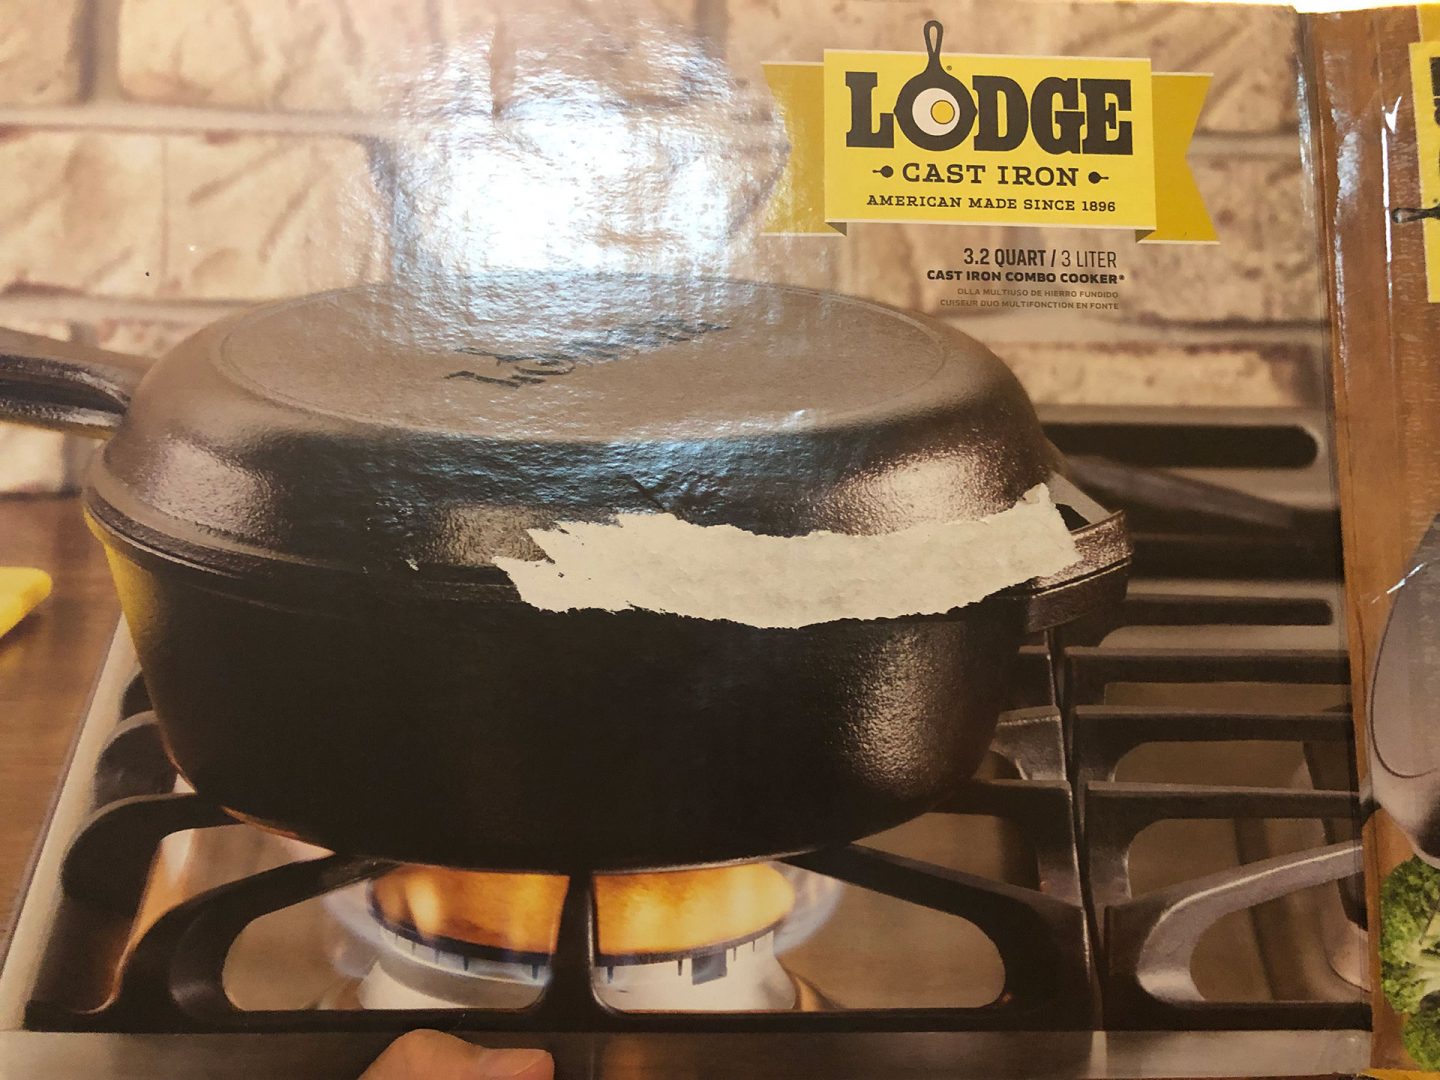 Lodge Cast Iron Combo Cooker in the Box Unboxing